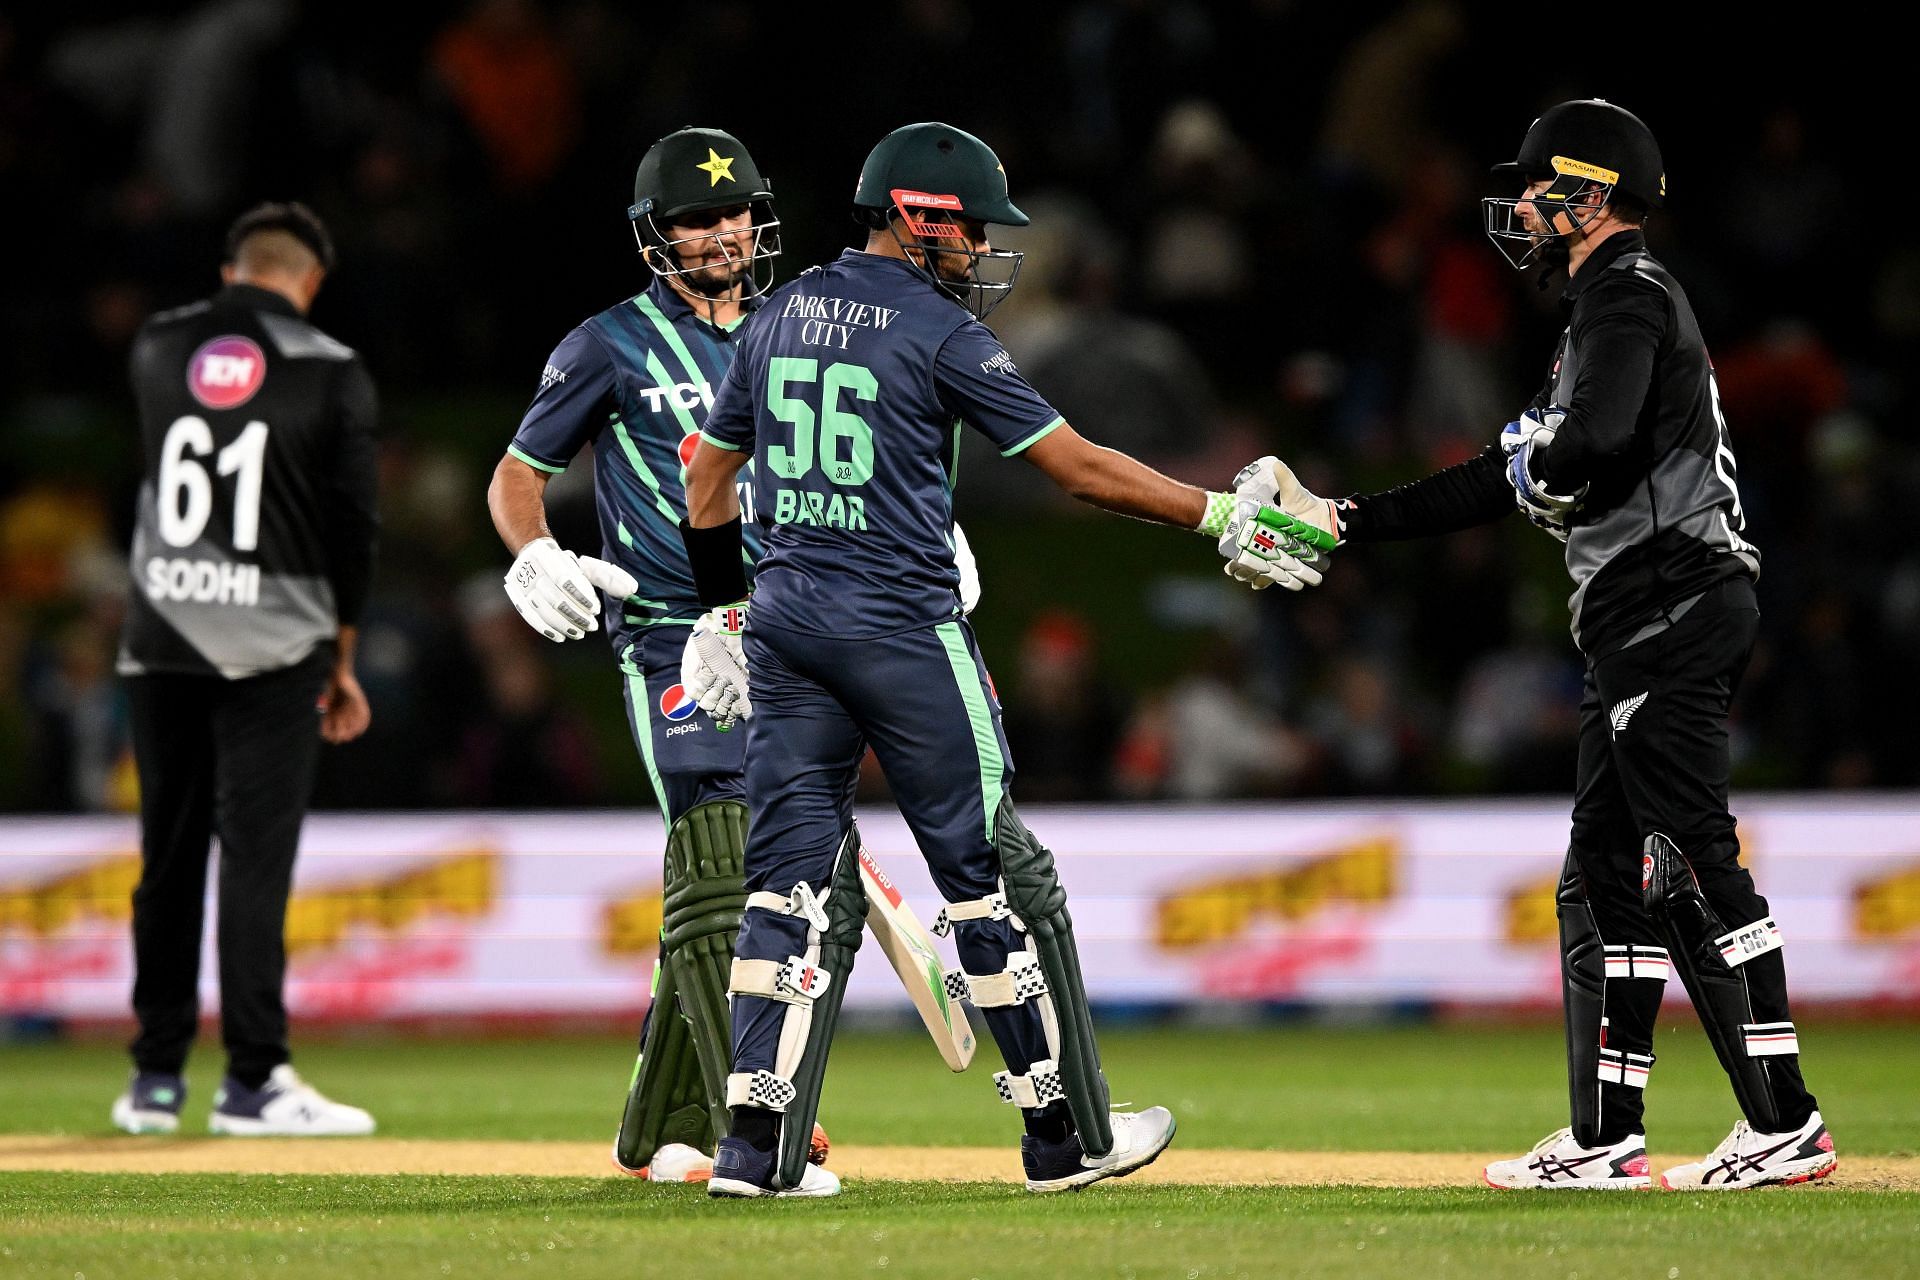 New Zealand T20I Tri-Series, Match 4 New Zealand vs Pakistan probable XIs, pitch report, weather forecast, match prediction and live streaming details